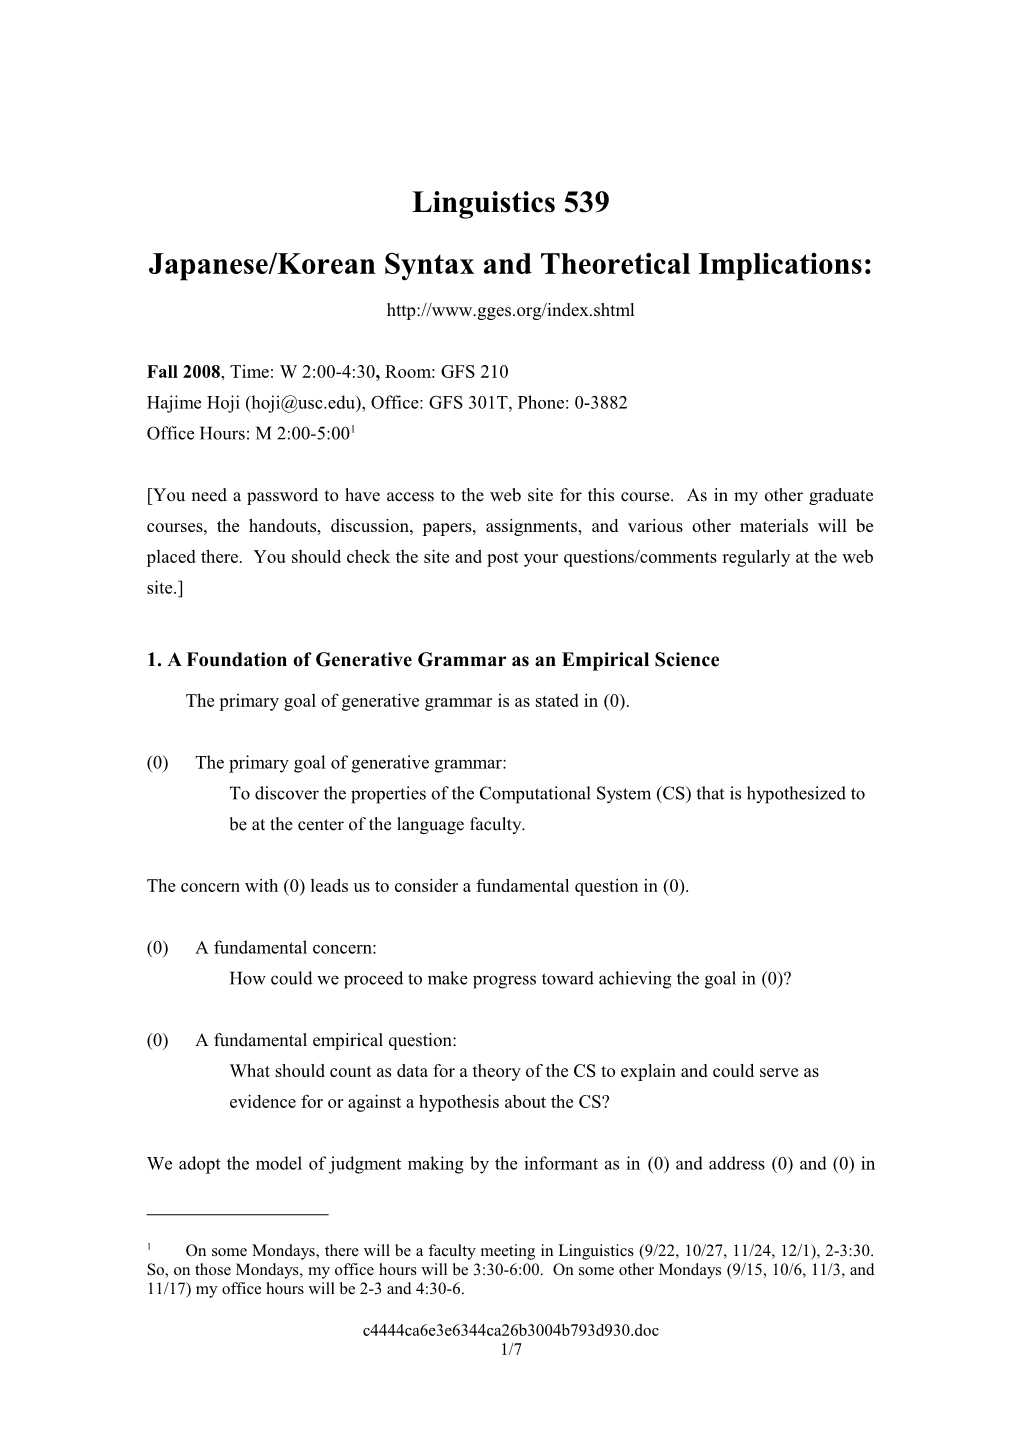 Japanese/Korean Syntax and Theoretical Implications